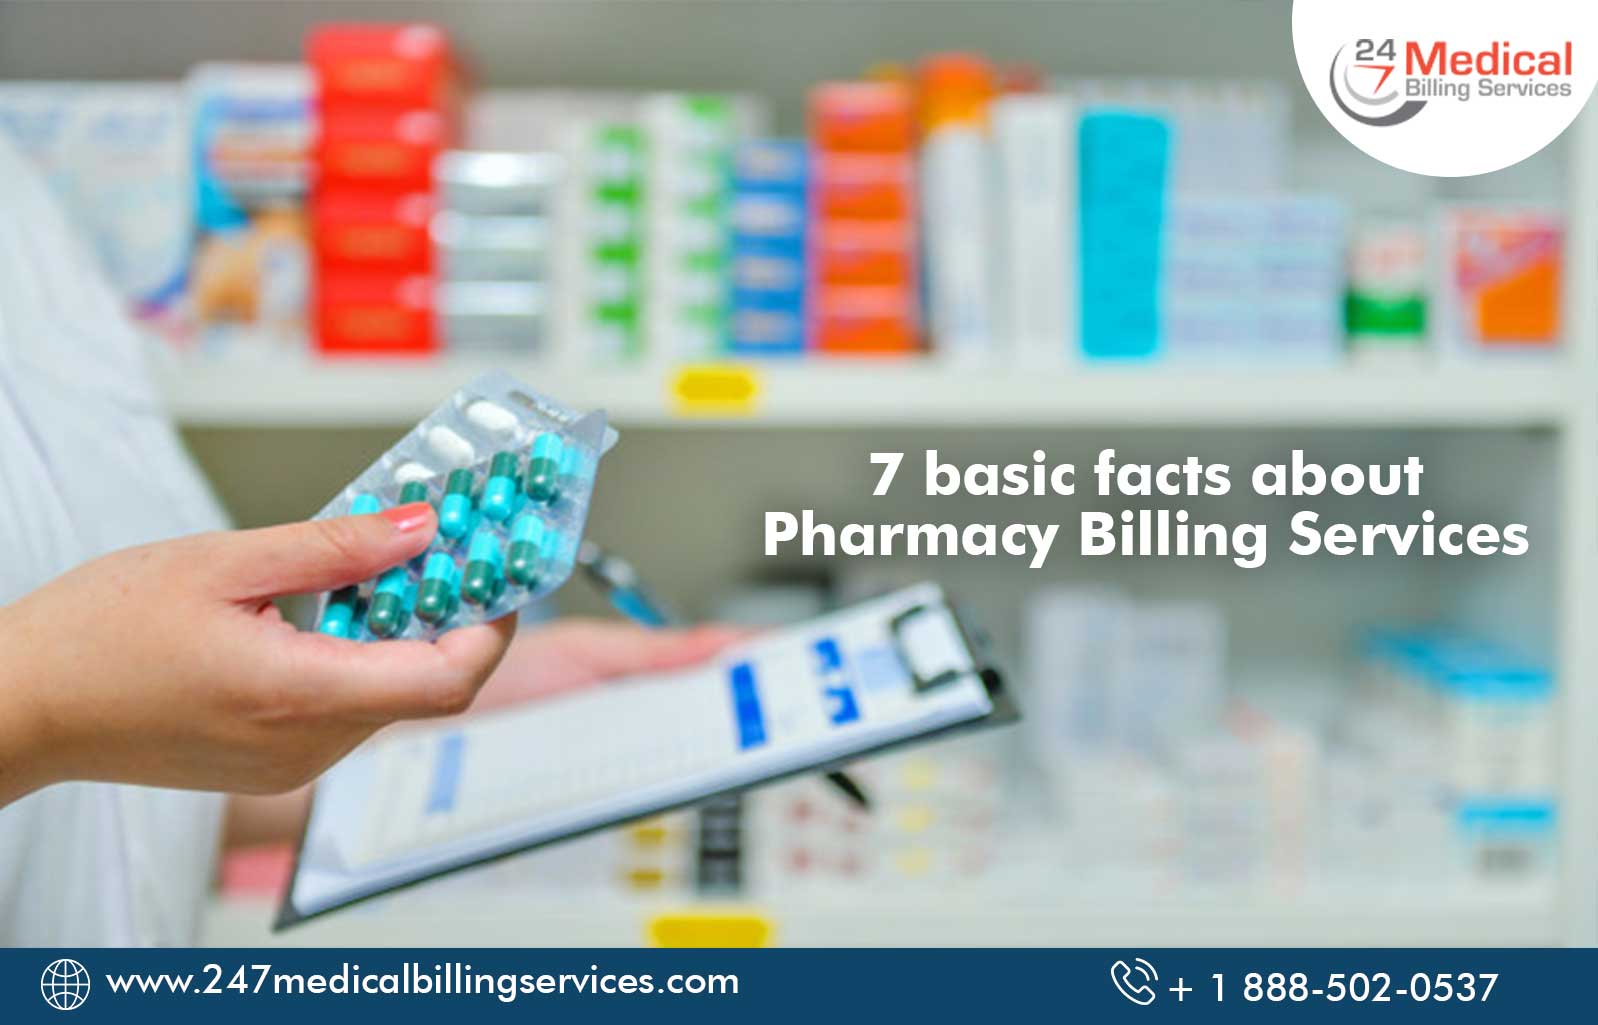  7 basic facts about Pharmacy Billing Services